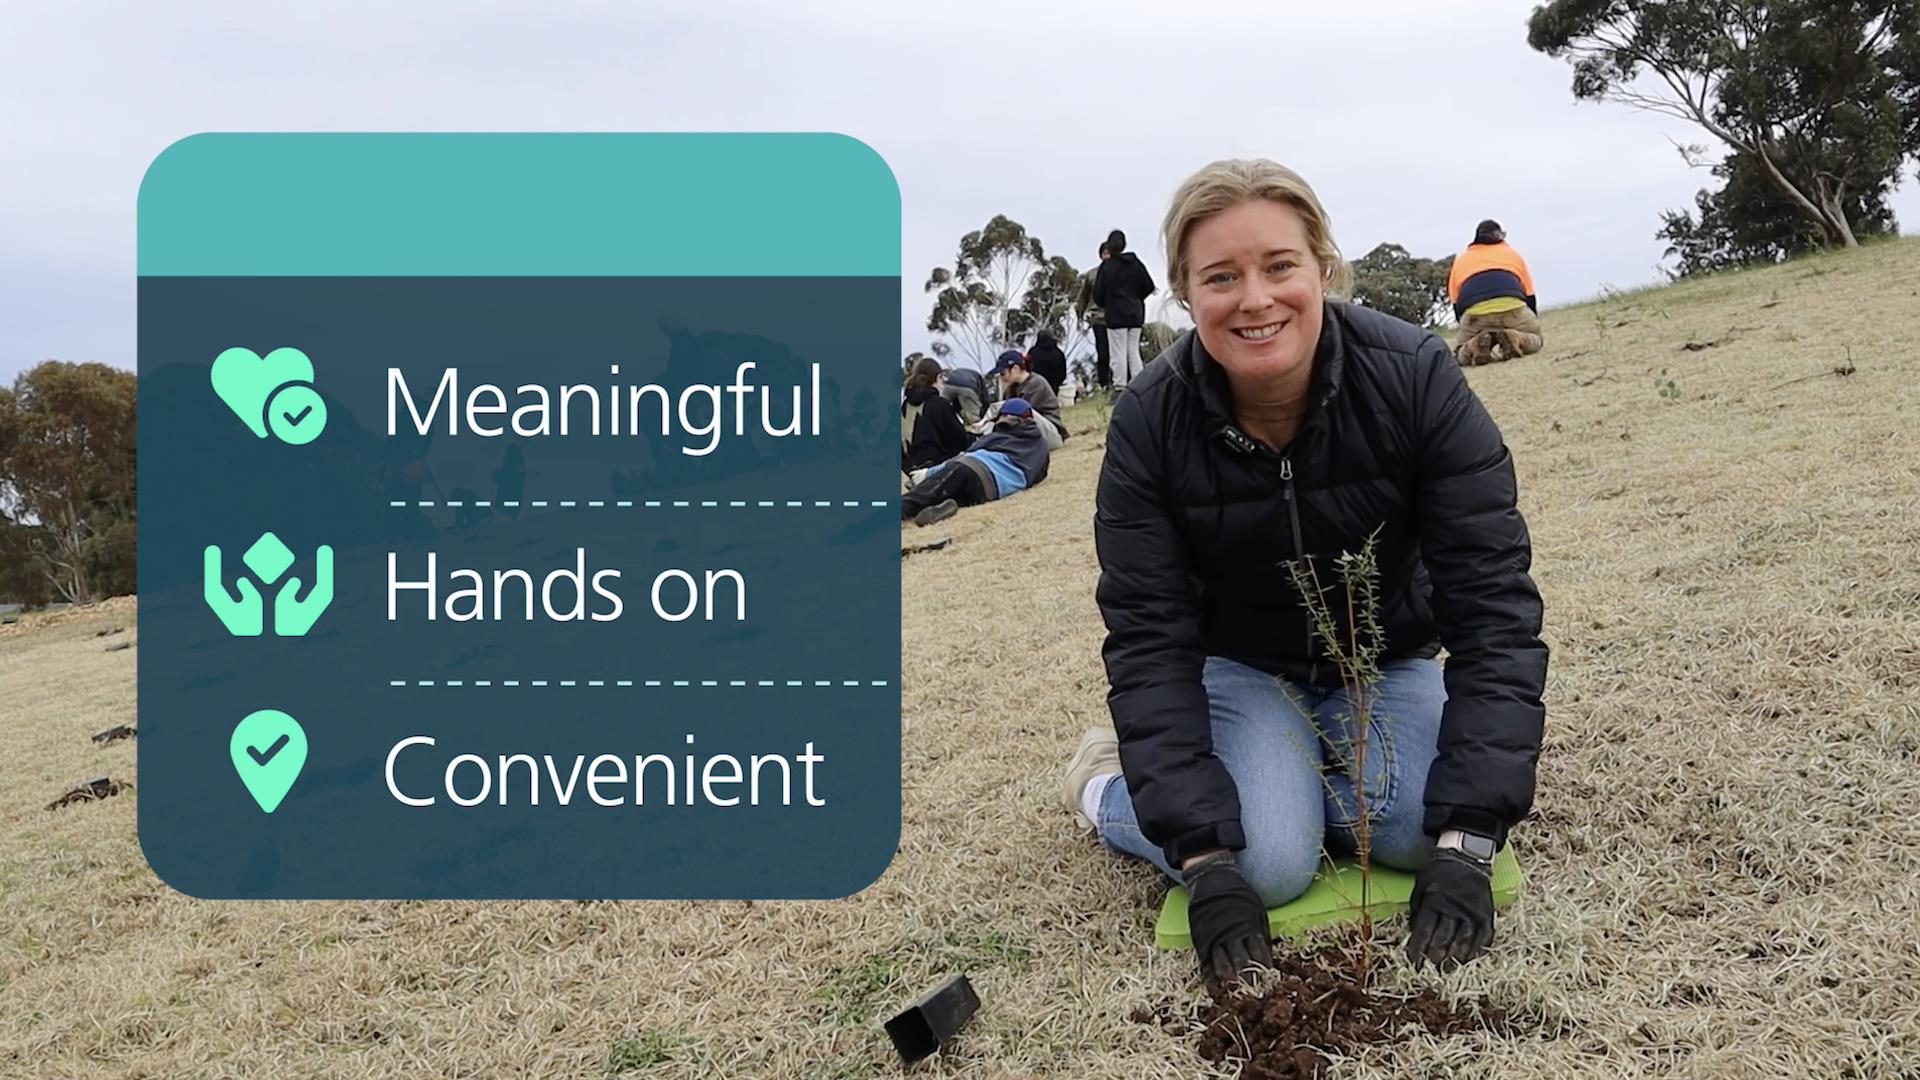 DG Amanda Wendt planting a tree and sharing meaningful, hands on, convenient volunteering